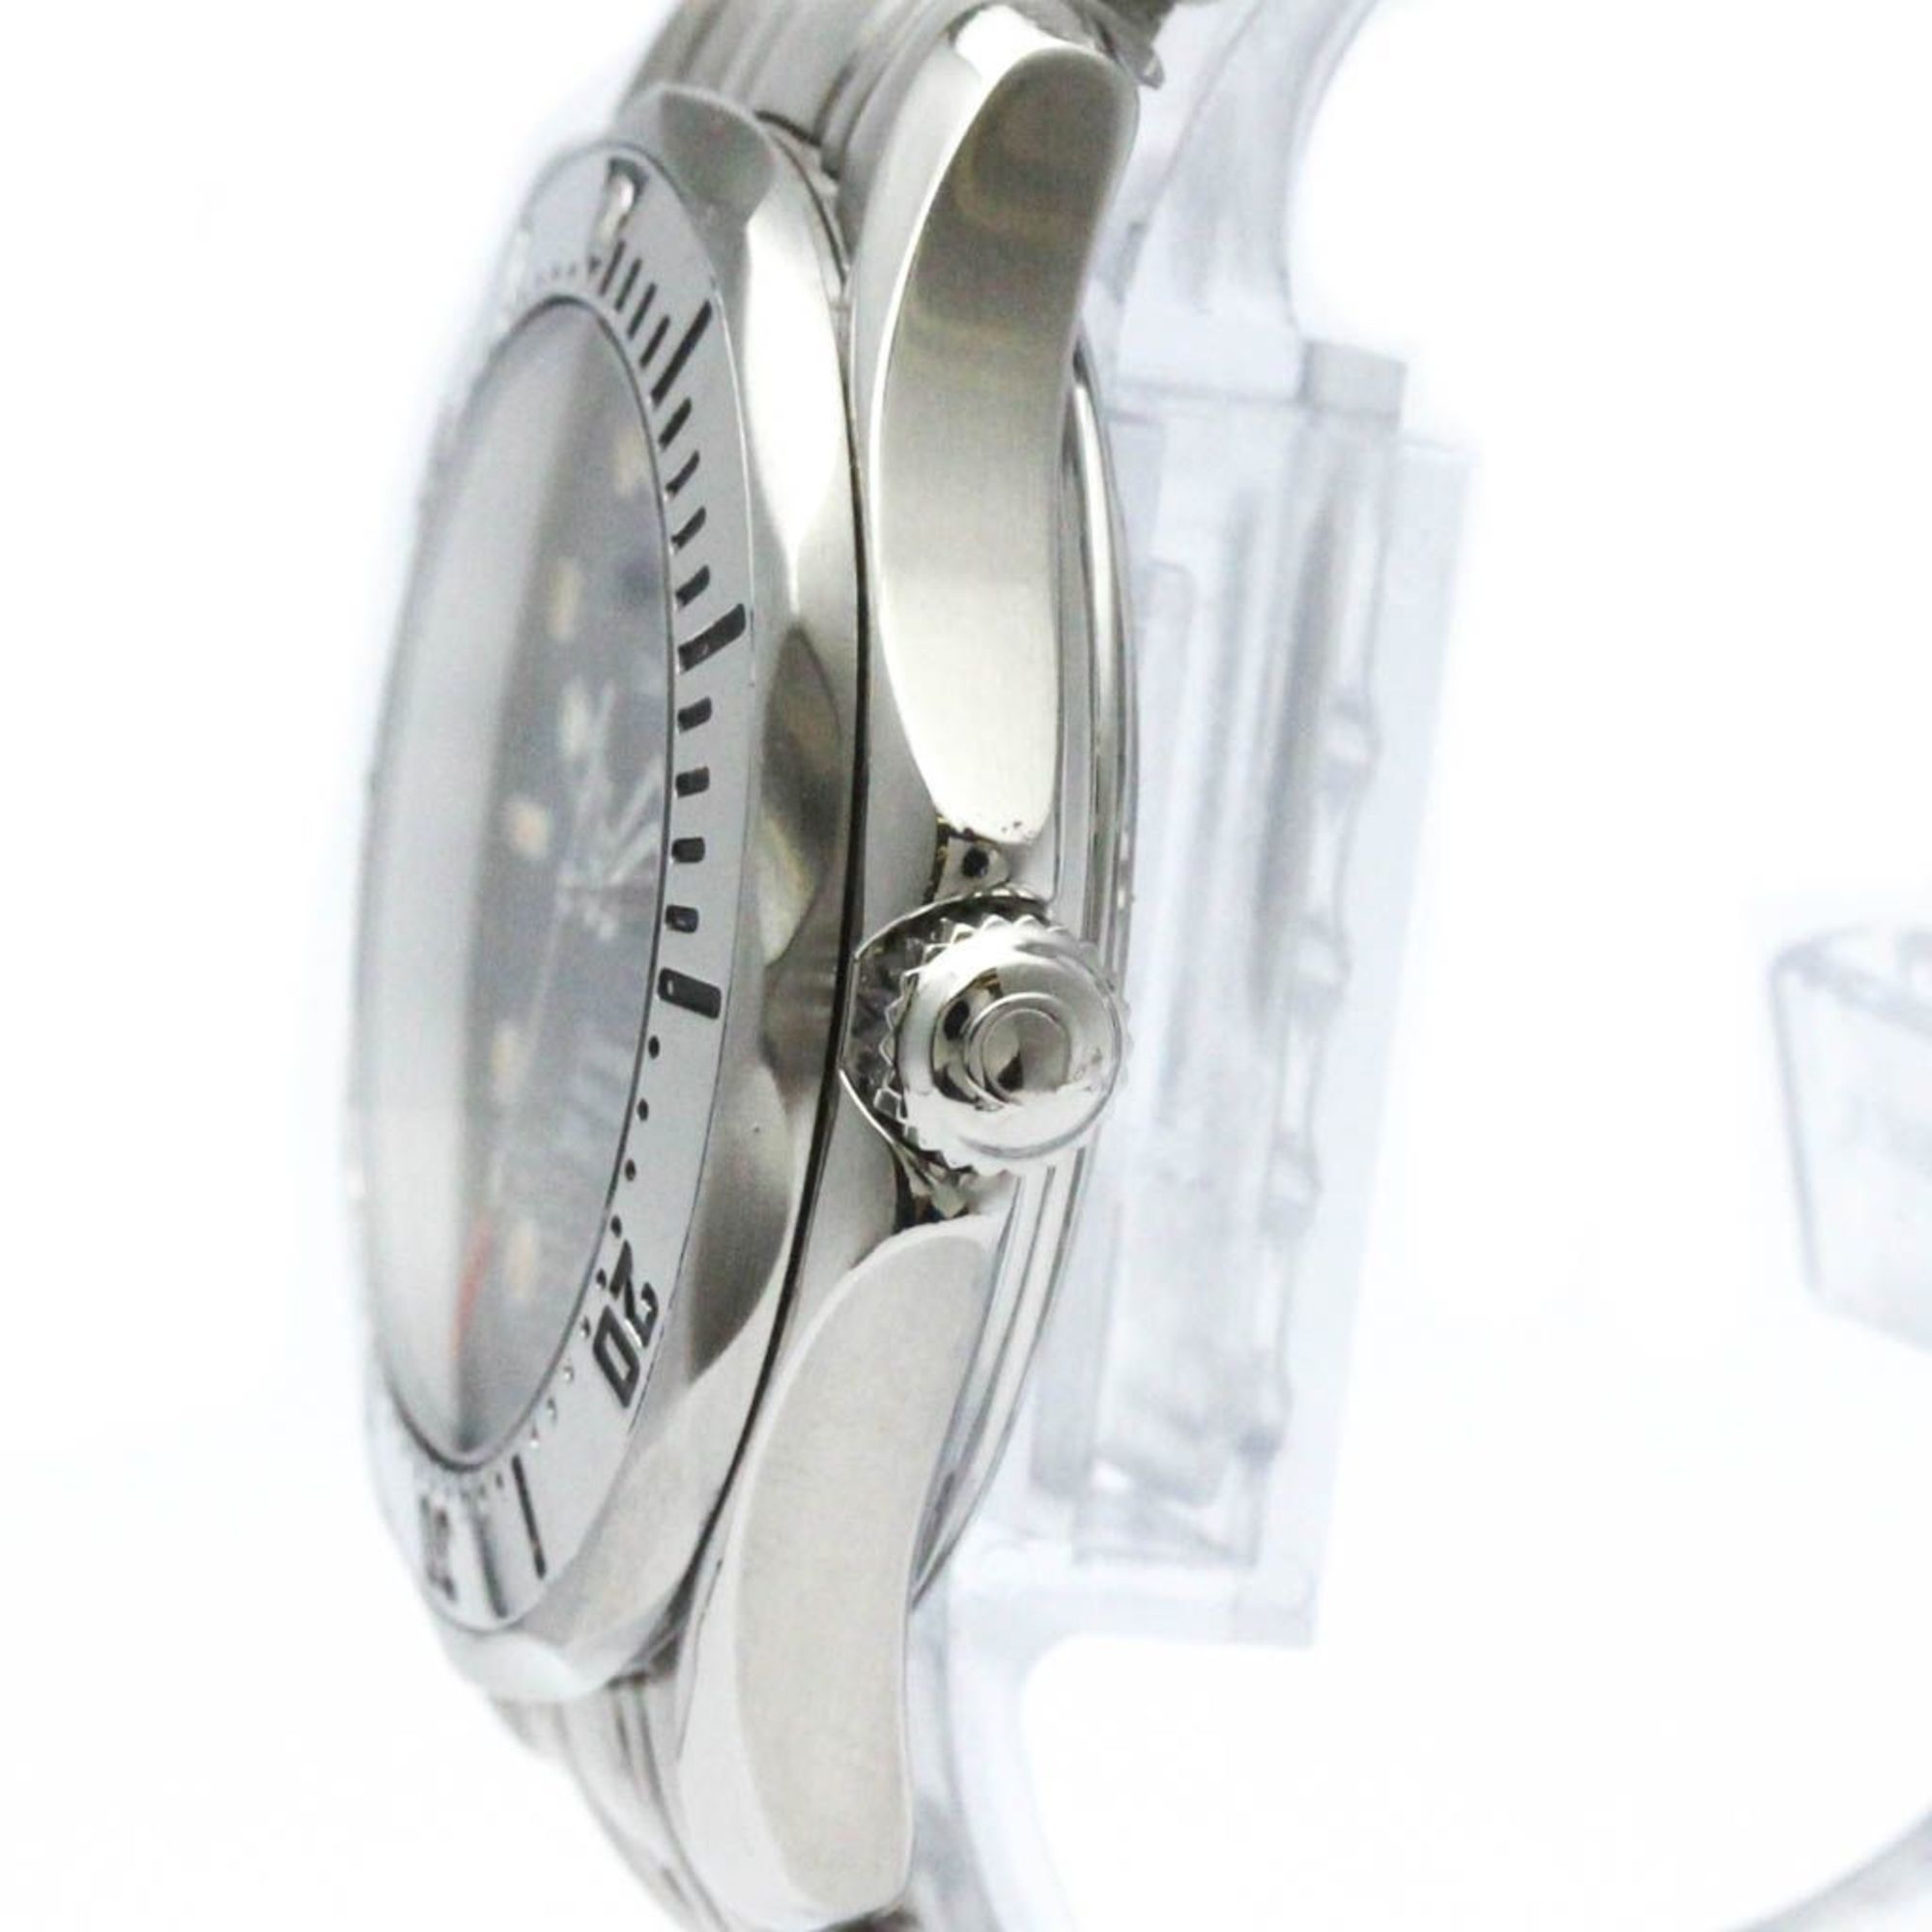 Polished OMEGA Seamaster Professional 300M Steel Mid Size Watch 2562.80 BF568302